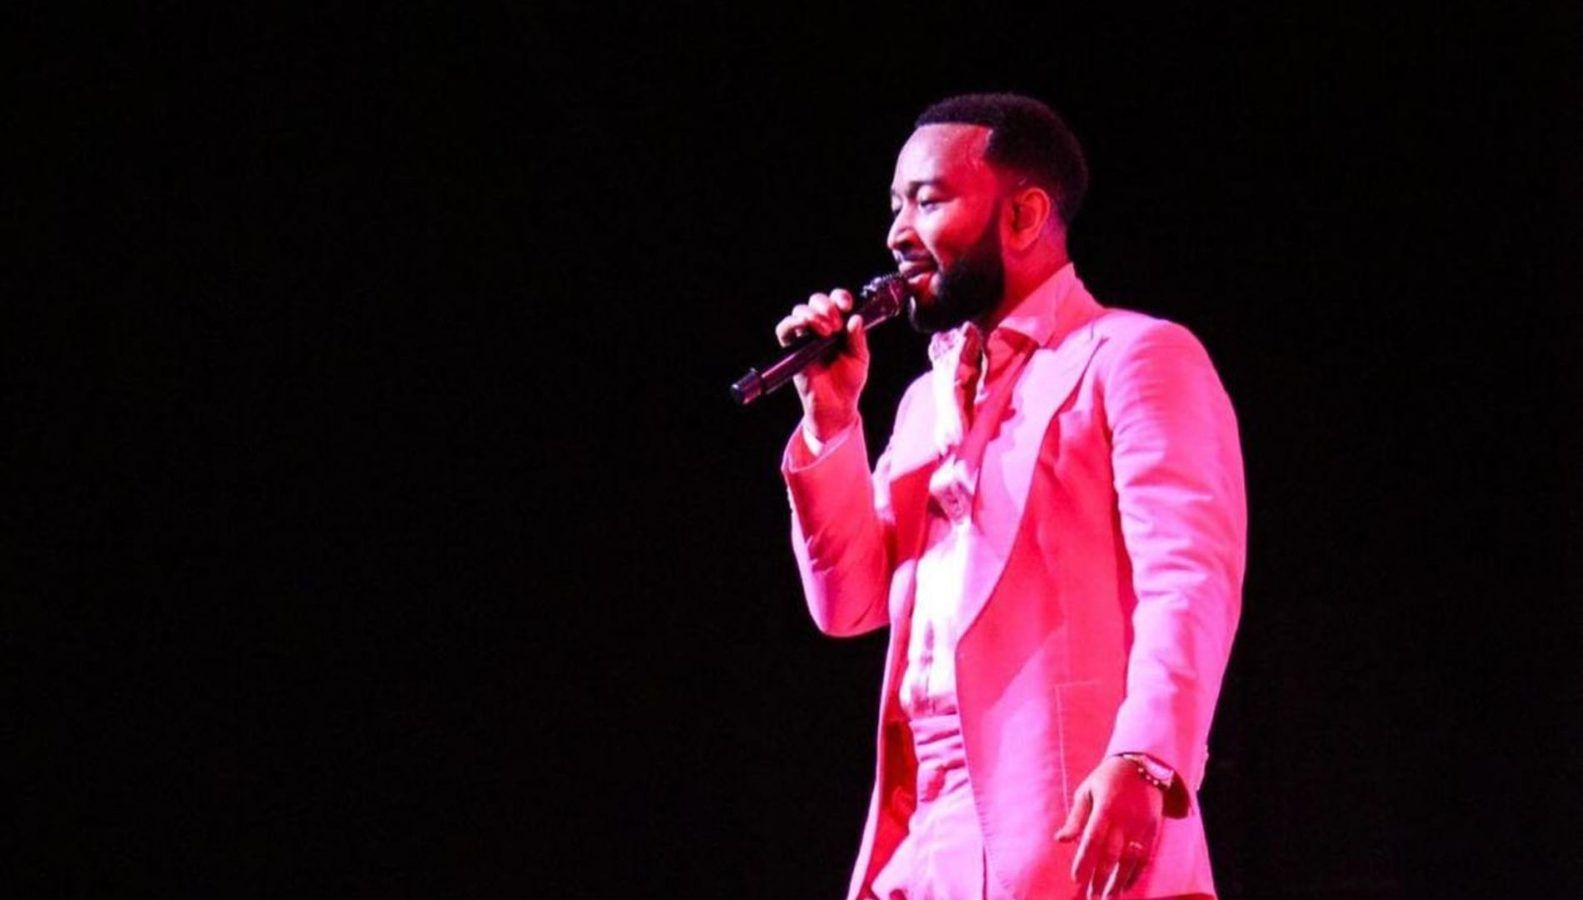 John Legend and Our Happy Company launch music NFT platform OurSong